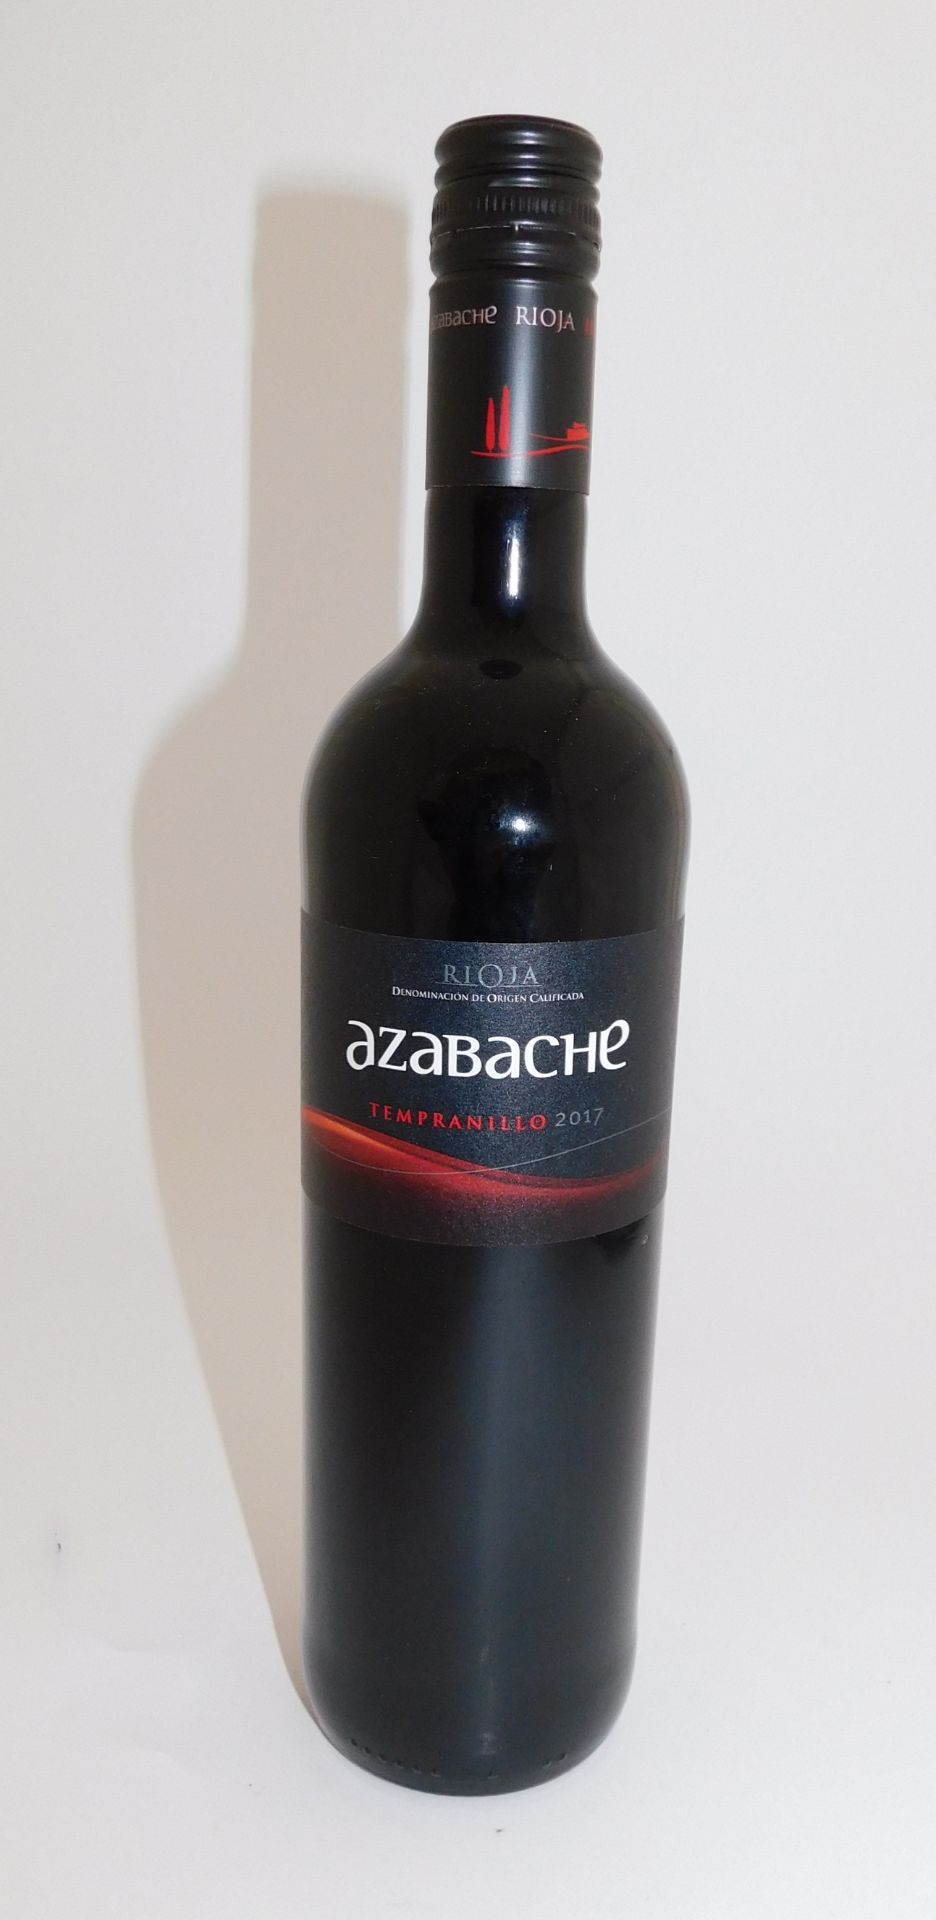 24 Bottles of Azabache Tempranillo 2017 Rioja, 75cl (Located Stockport – See General Notes for